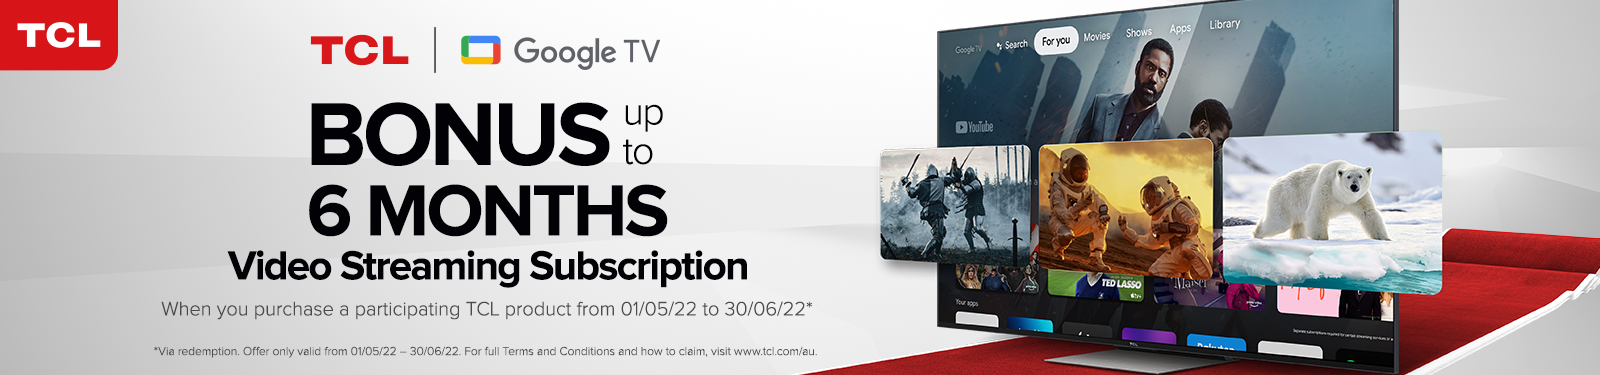 Bonus 6 Months Video Streaming Subscription with selected TCL products at Retravision